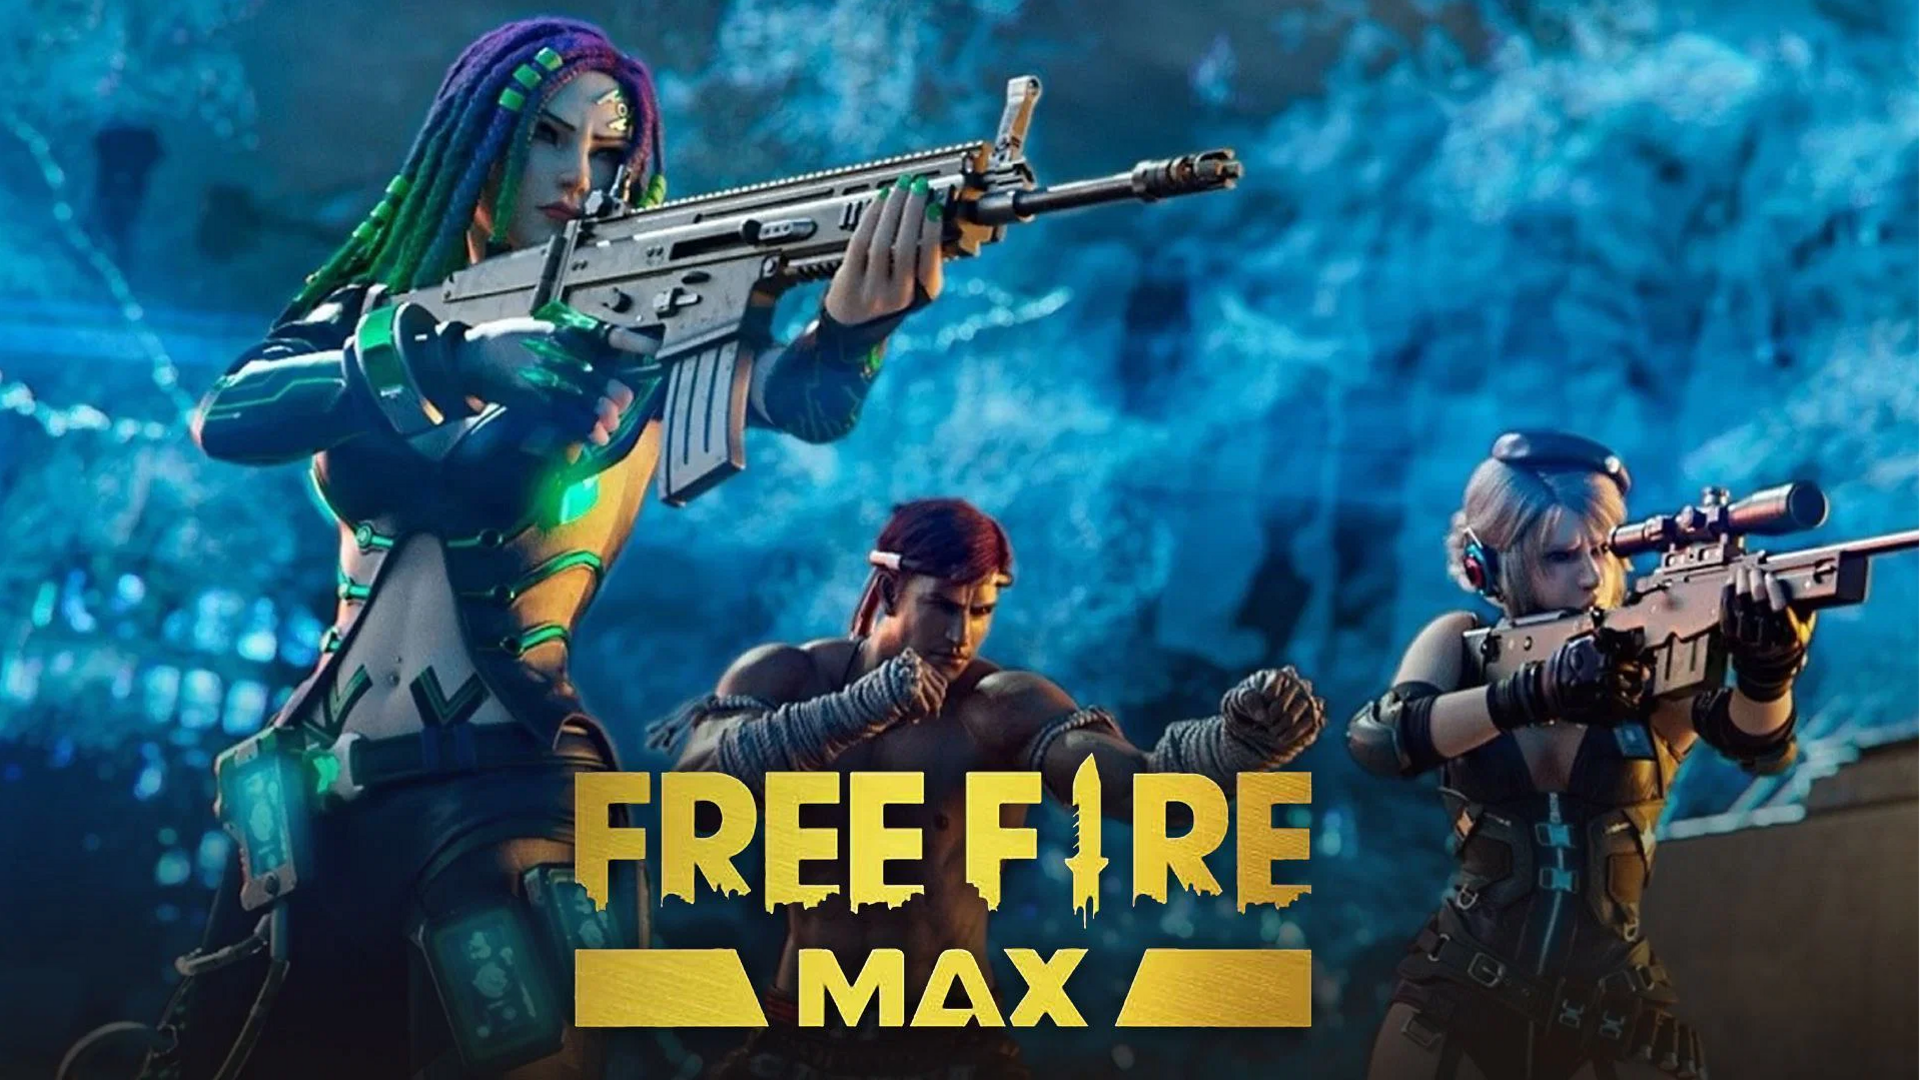 Garena Free Fire MAX redeem codes for October 31